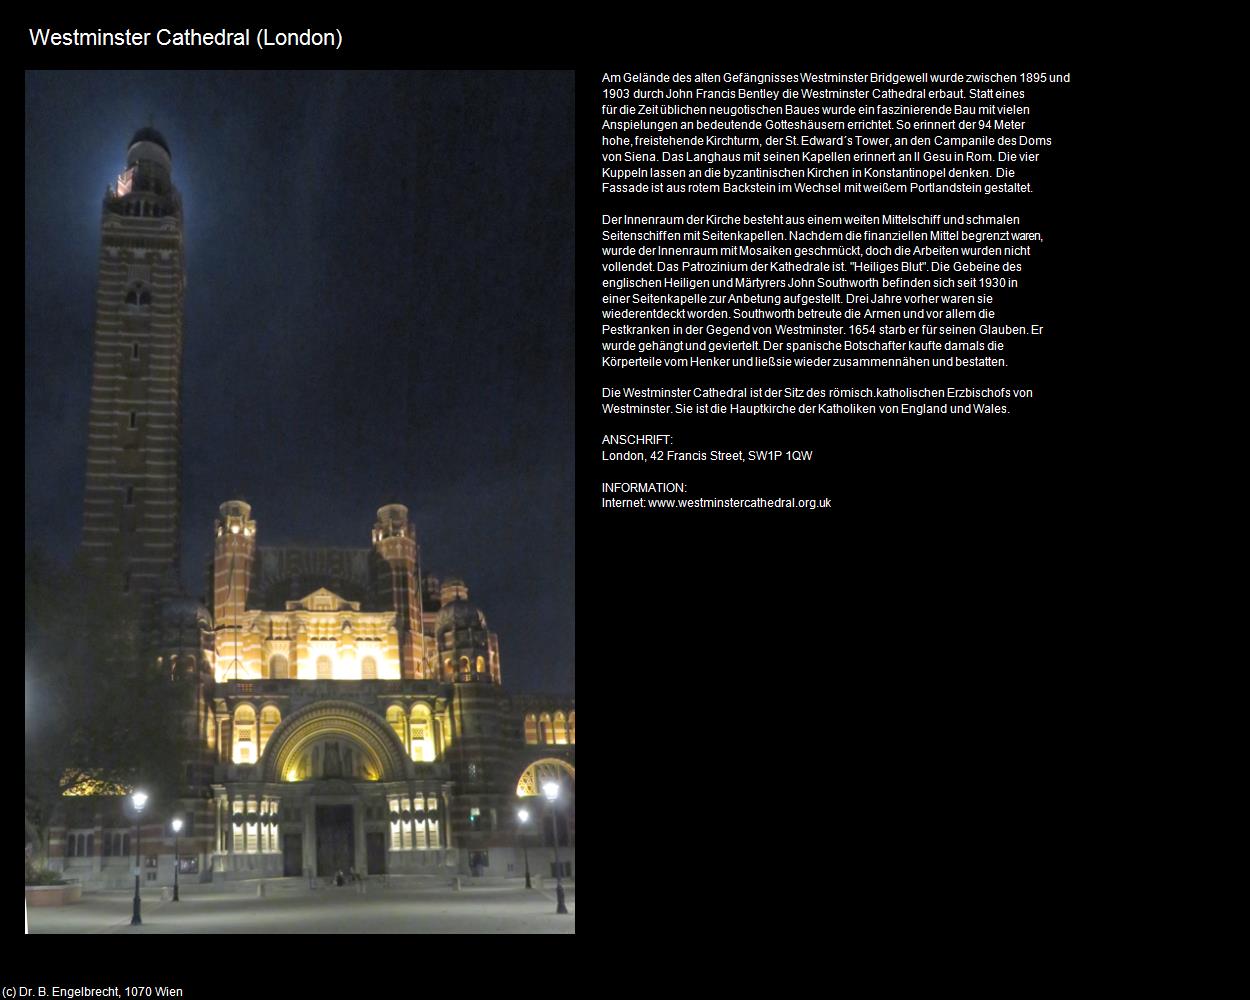 Westminster Cathedral              (London, England) in Kulturatlas-ENGLAND und WALES